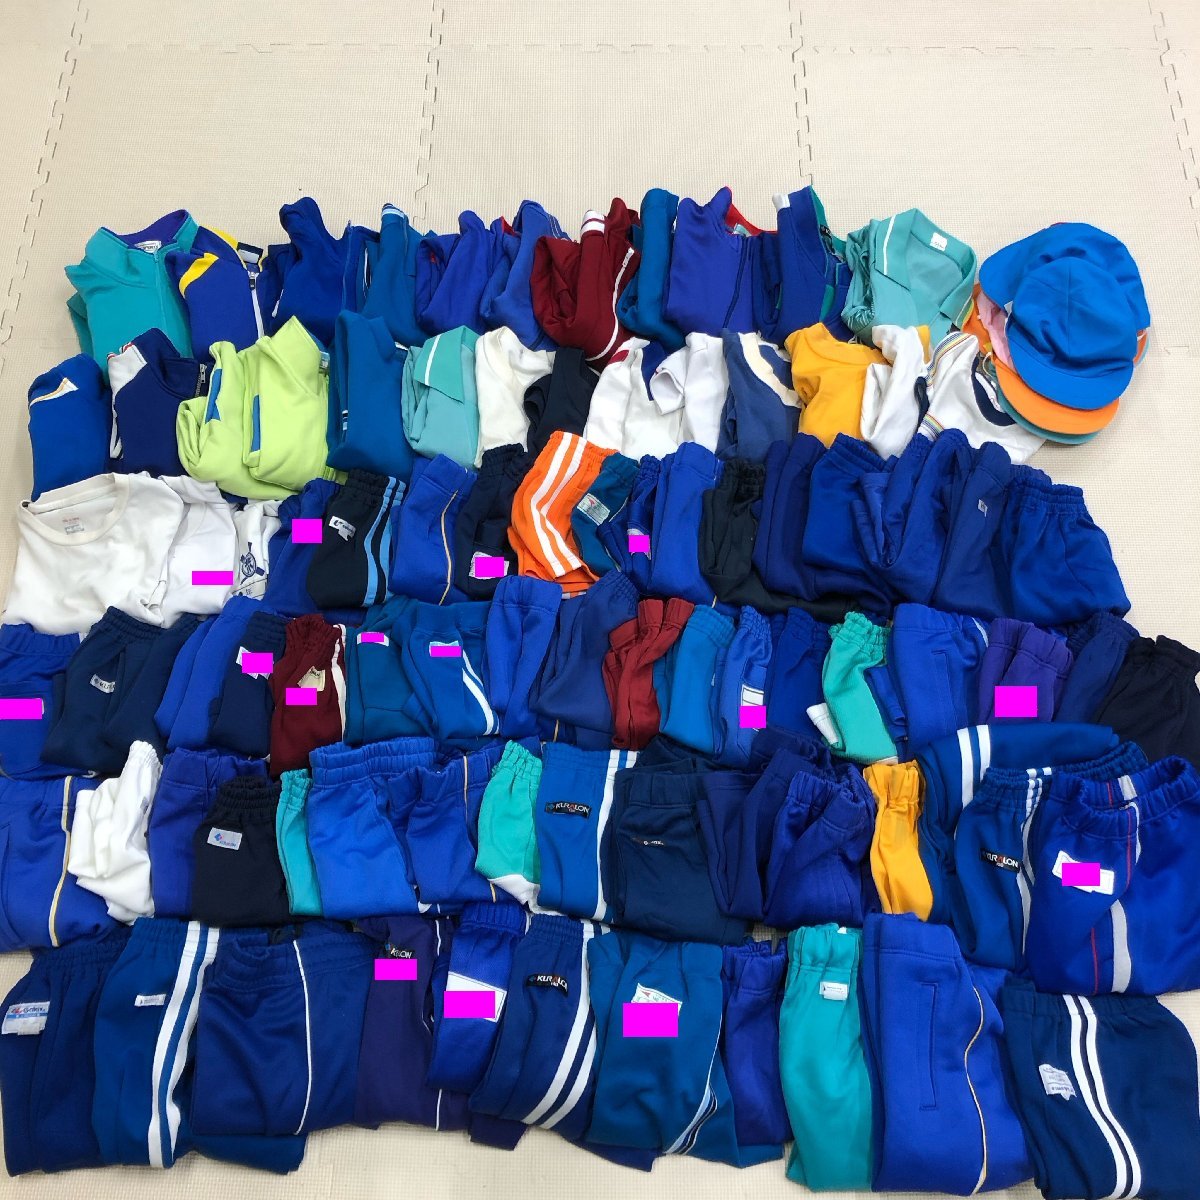 M380/Y( used / box ) Yamagata direction gym uniform 93 point /SS/M/120/130/140/150/ long sleeve / short sleeves / long trousers / shorts / hat / white / blue series / man woman mixing / children's /../ summarize 